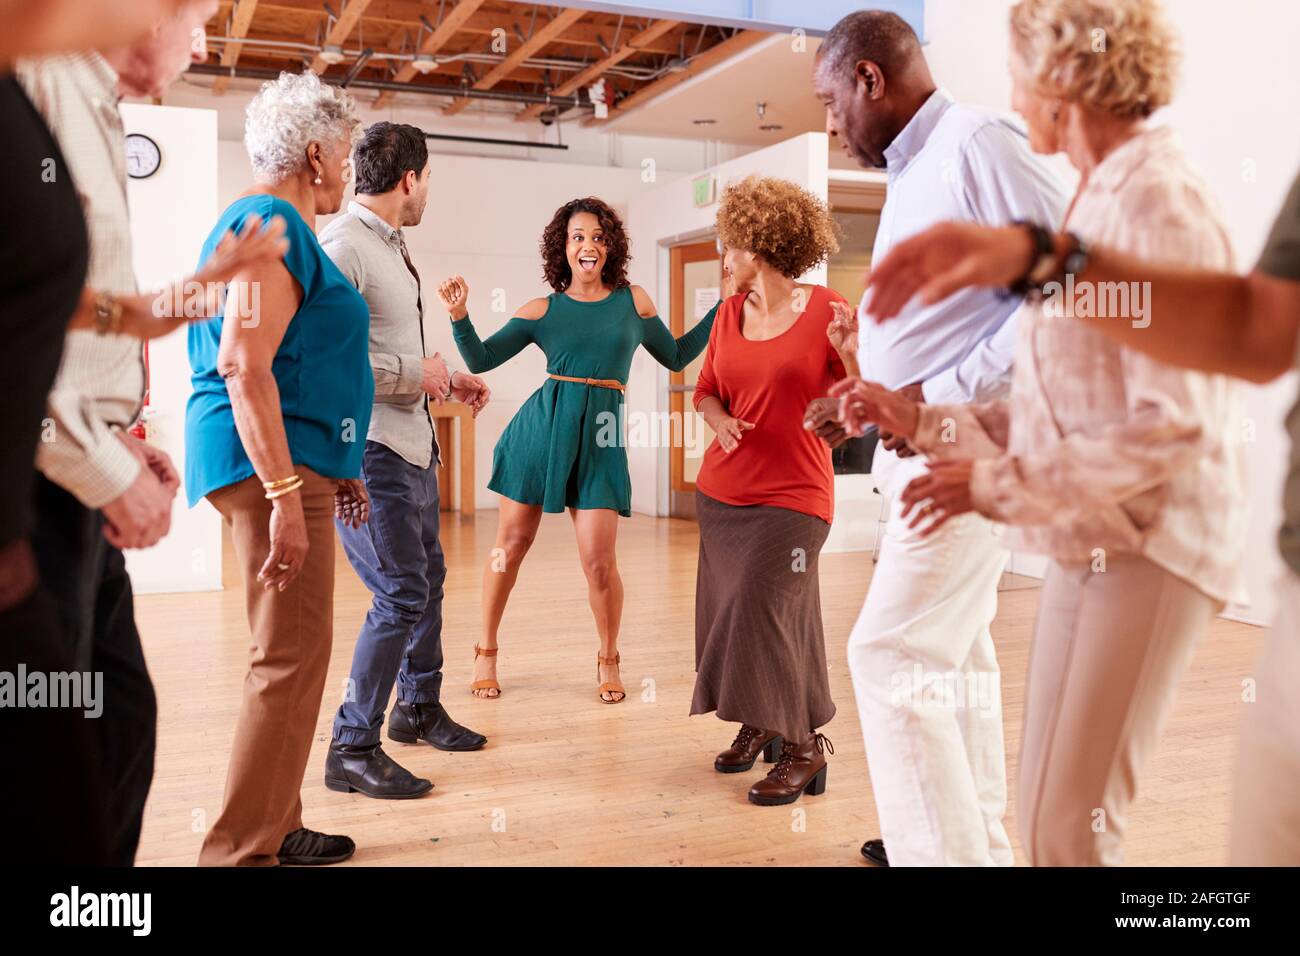 People Attending Dance Class In Community Center Stock Photo